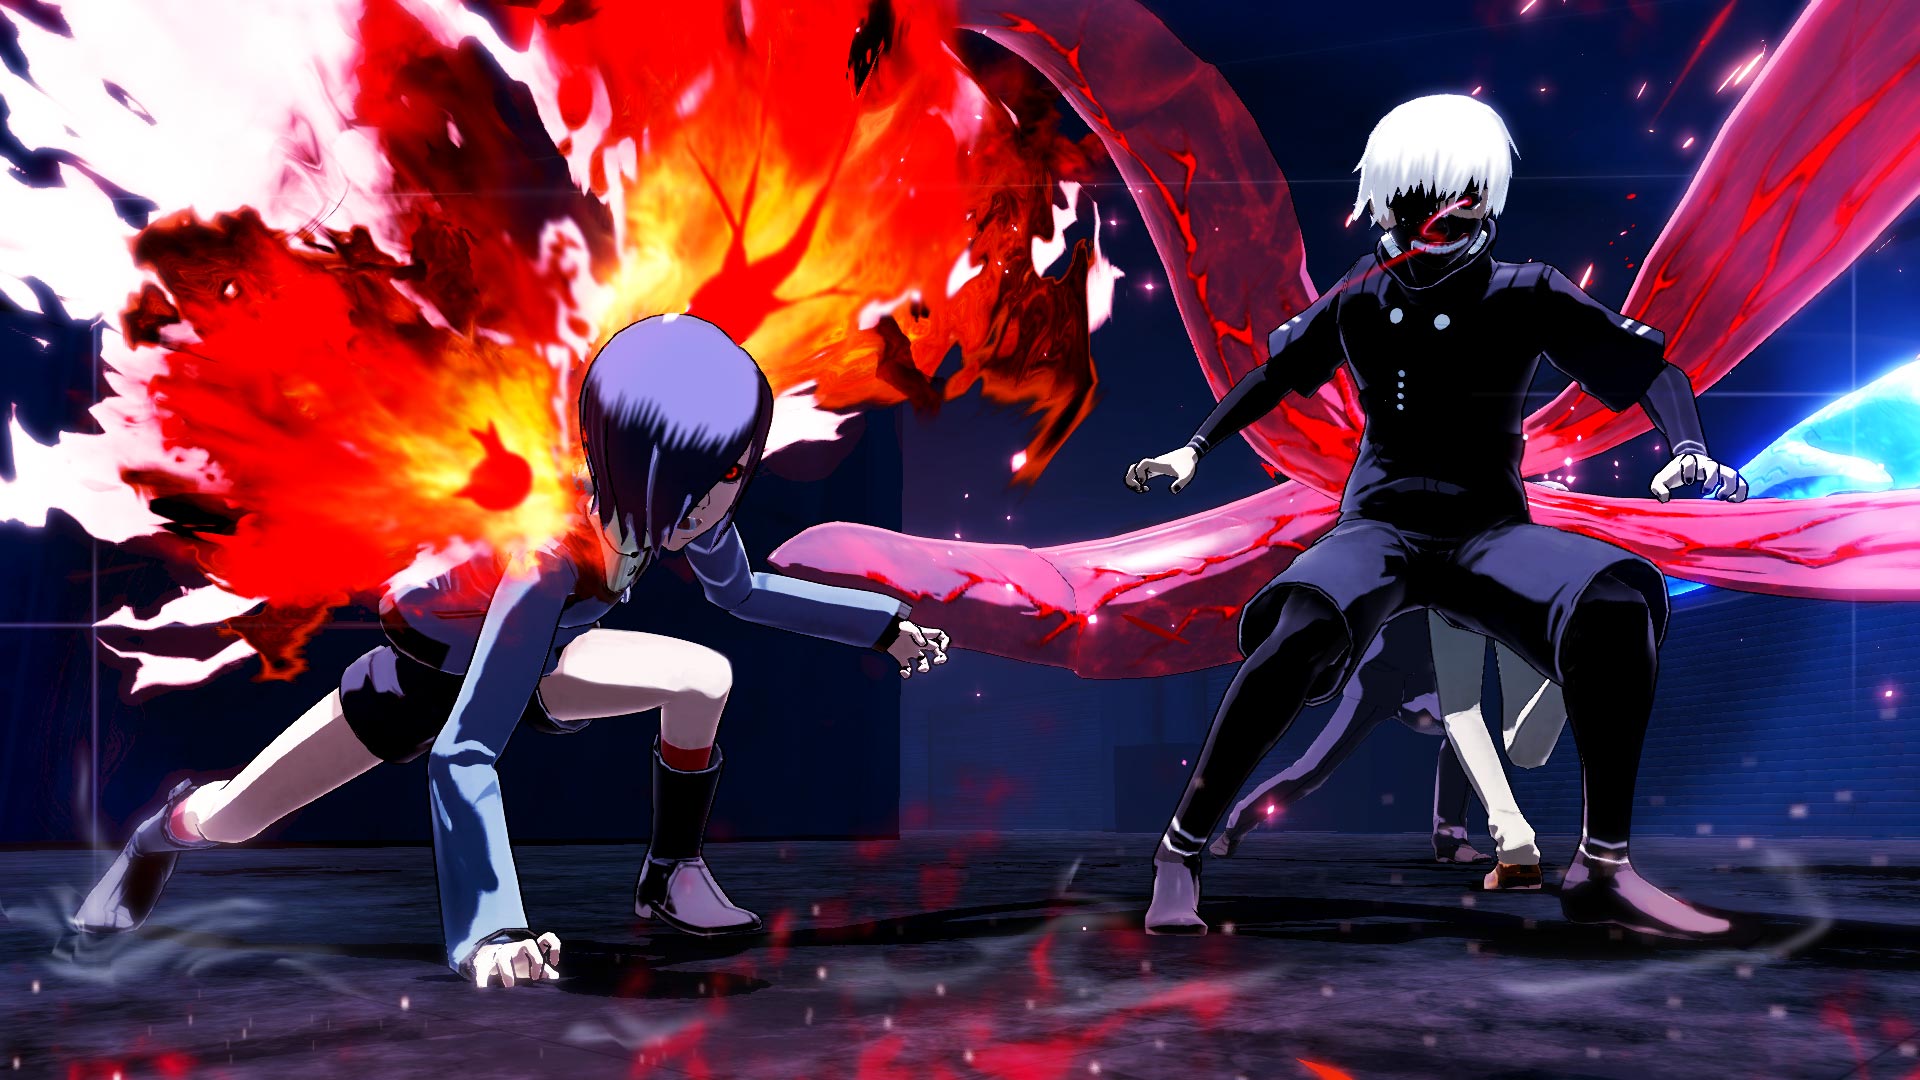 Tokyo Ghoul Re Call To Exist For Ps4 Buy Cheaper In Official Store Psprices Usa